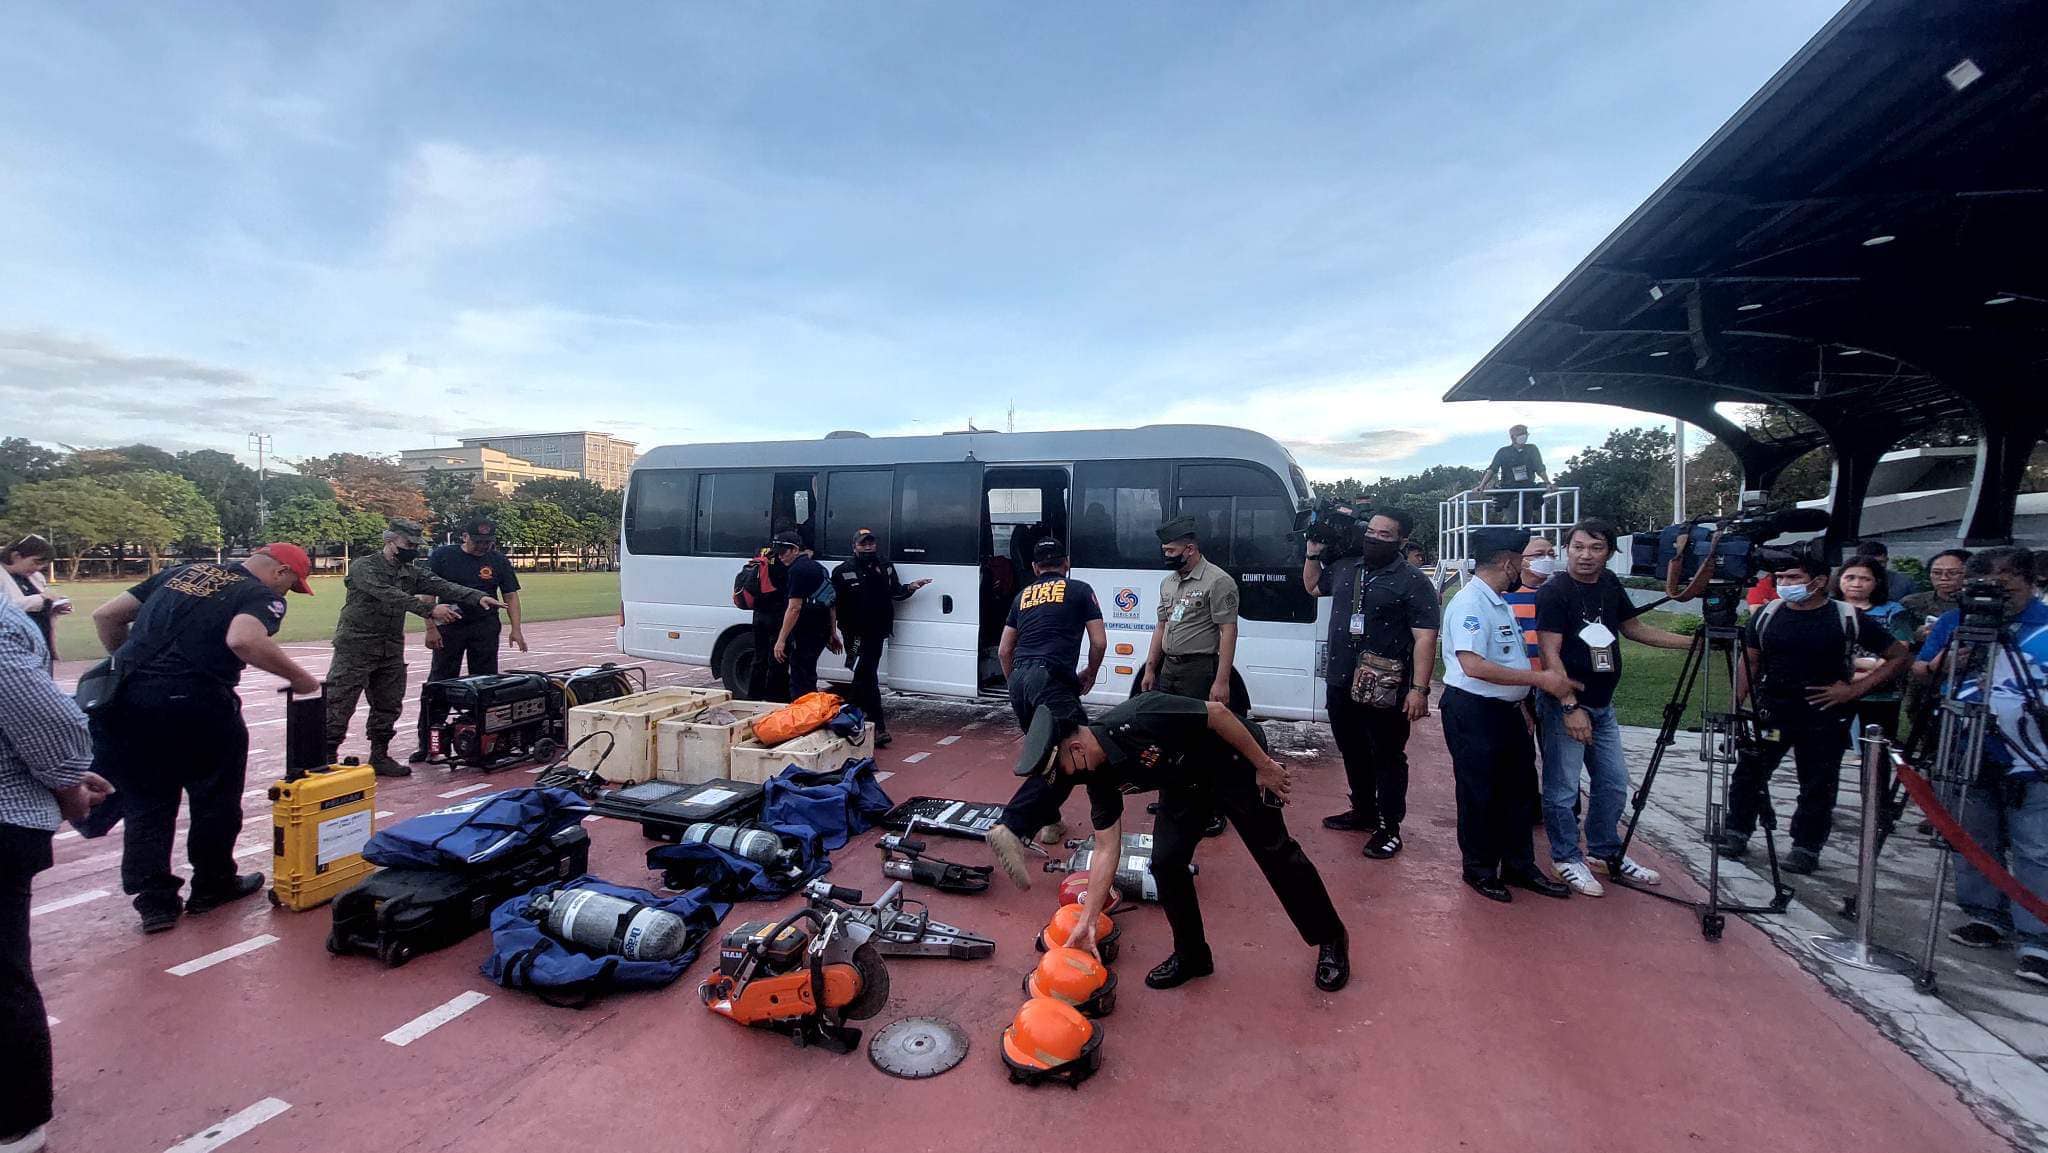 An 8-man humanitarian team from the Subic Bay Metropolitan Authority (SBMA) will help in the emergency efforts in Turkey and Syria, which were struck by a magnitude 7.8 earthquake early Monday